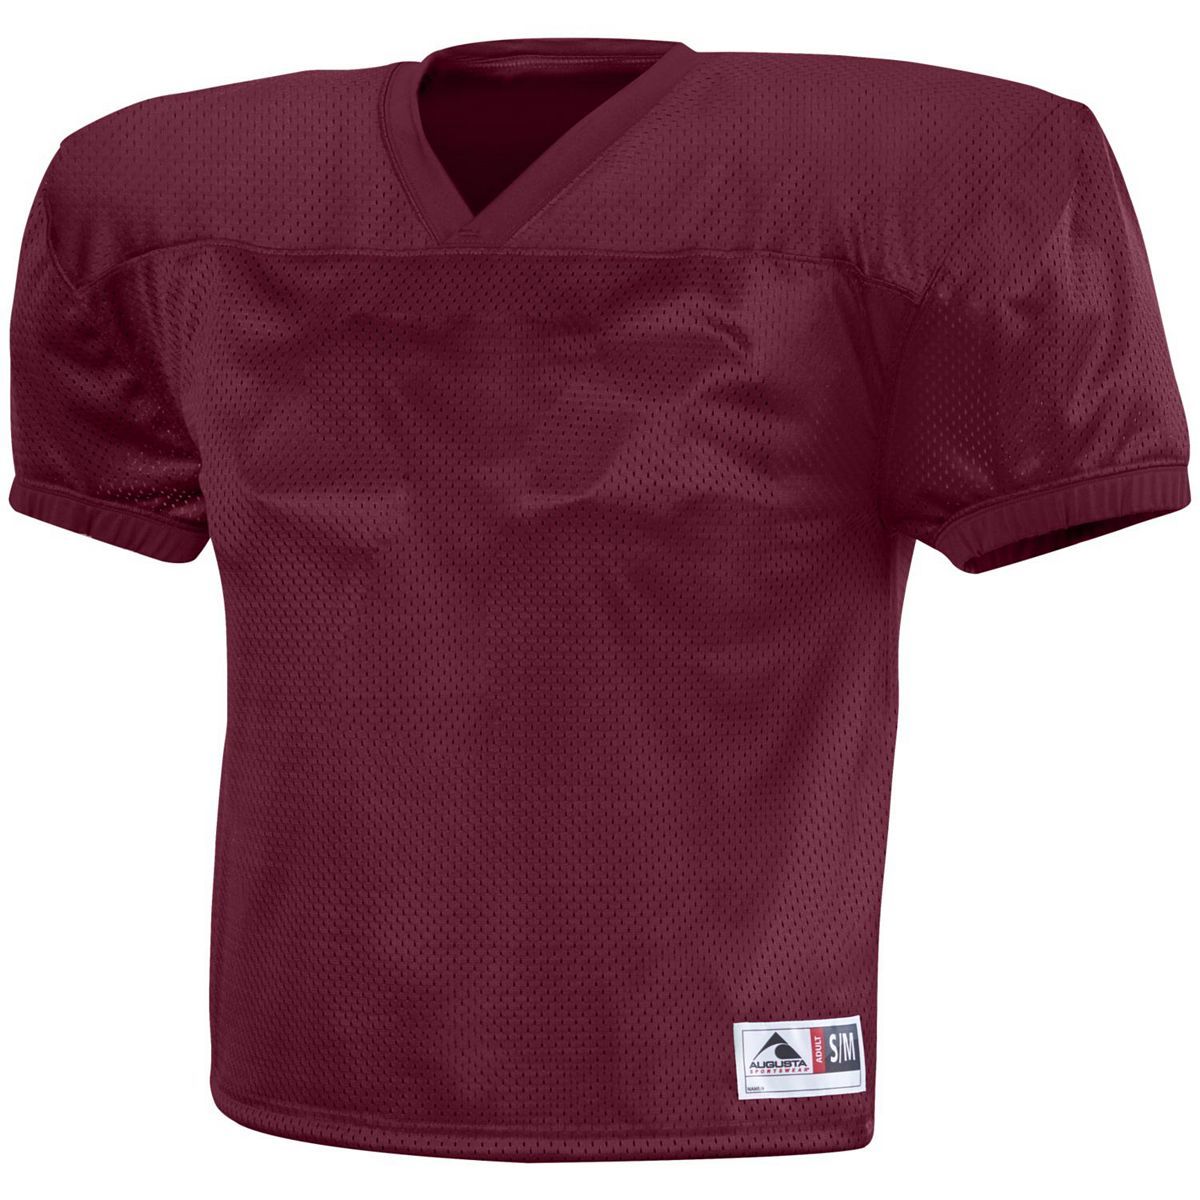 Augusta Sportswear Dash Practice Jersey in Maroon  -Part of the Adult, Adult-Jersey, Augusta-Products, Football, Shirts, All-Sports, All-Sports-1 product lines at KanaleyCreations.com